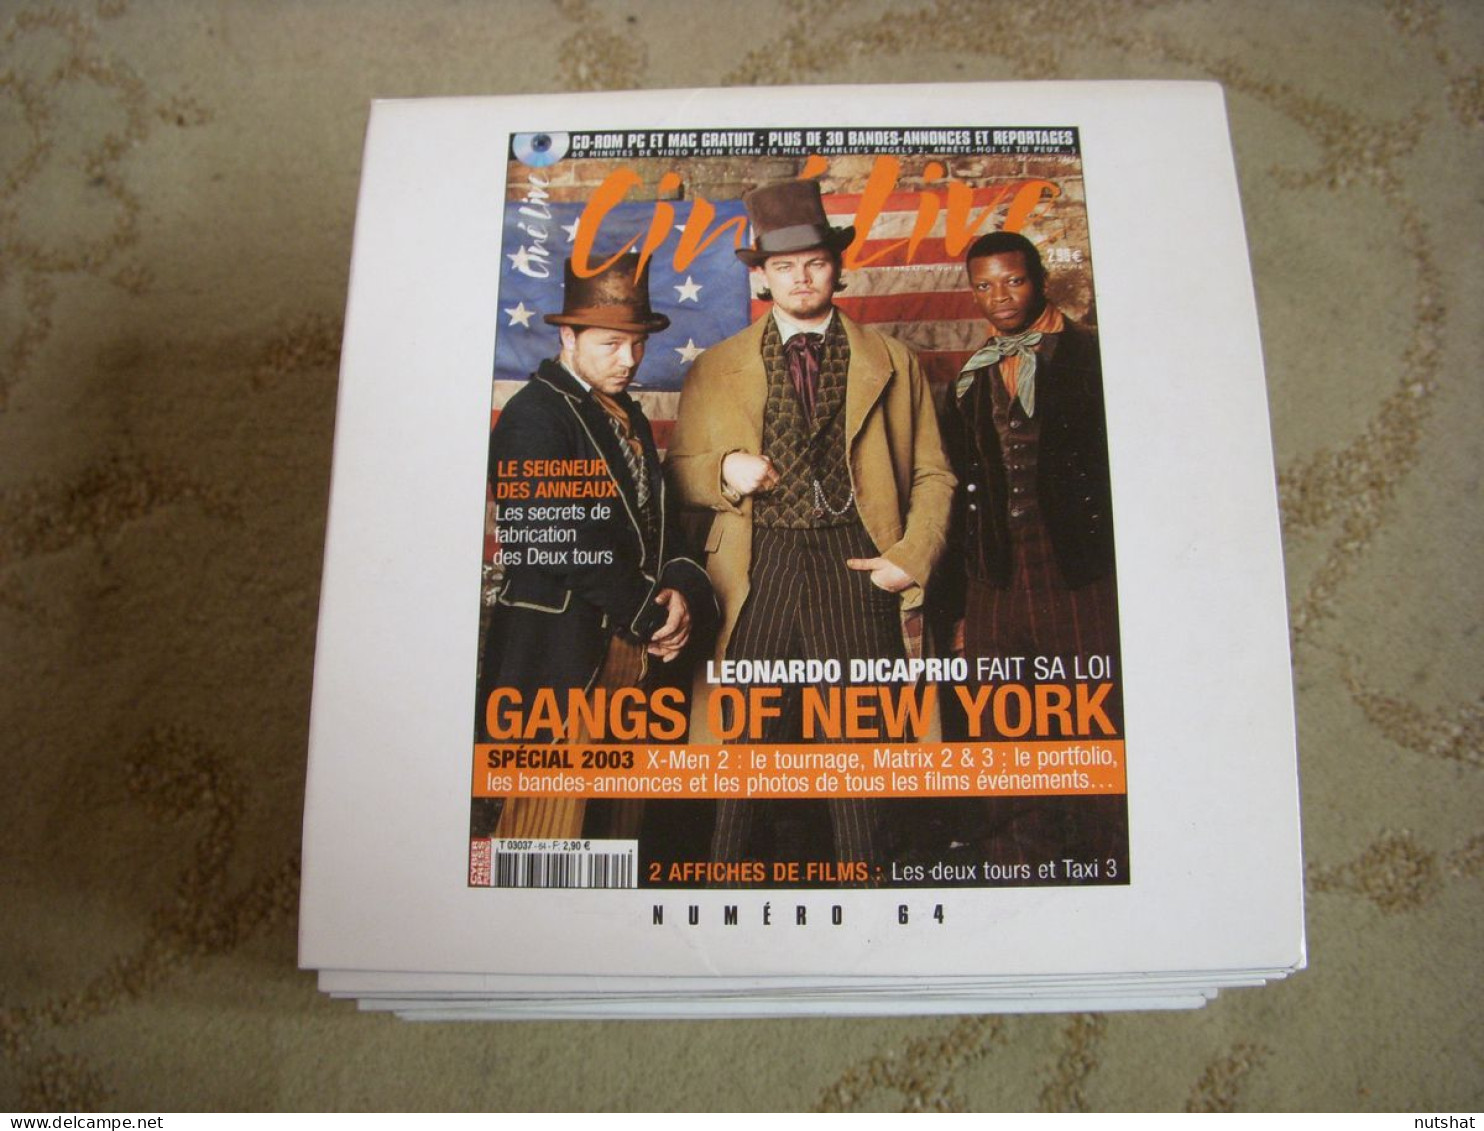 CD PROMO BANDES ANNONCES FILM CINE LIVE 64 01.2003 GANGS Of NEW YORK Di CAPRIO - Other Formats